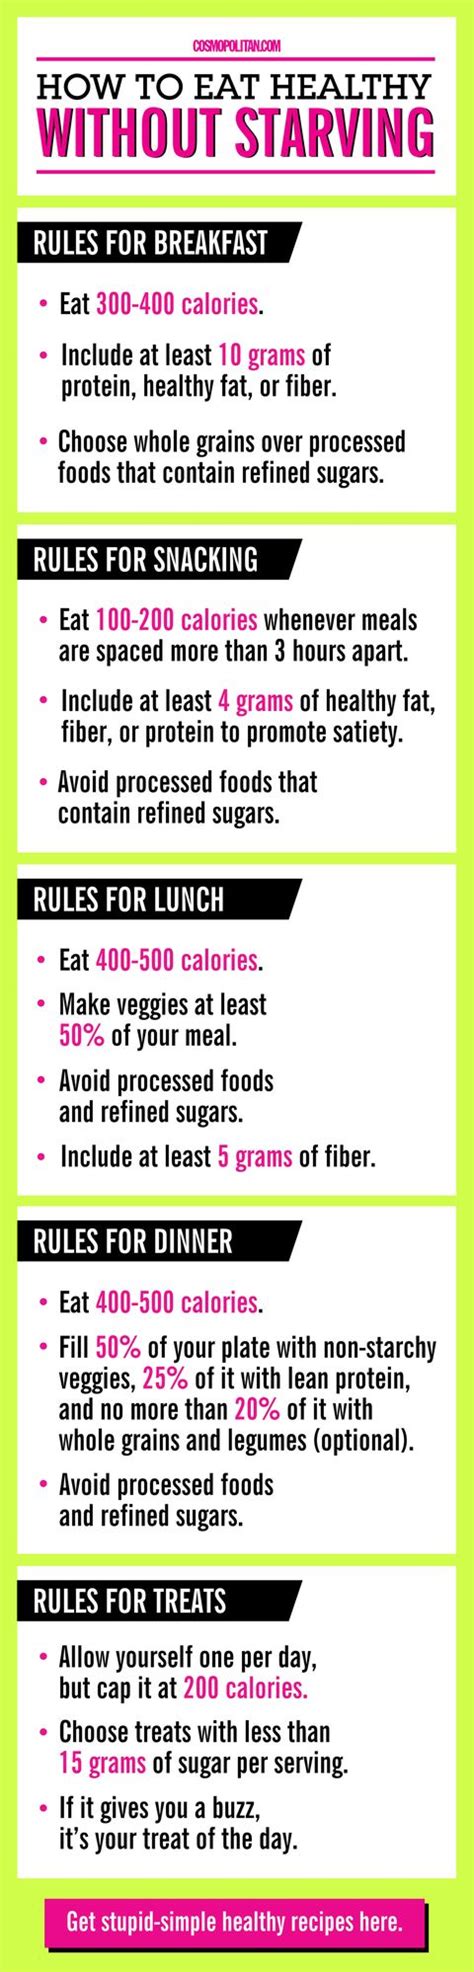 Healthy Eating Plan — 16 Rules to Eat Healthy Without Starving